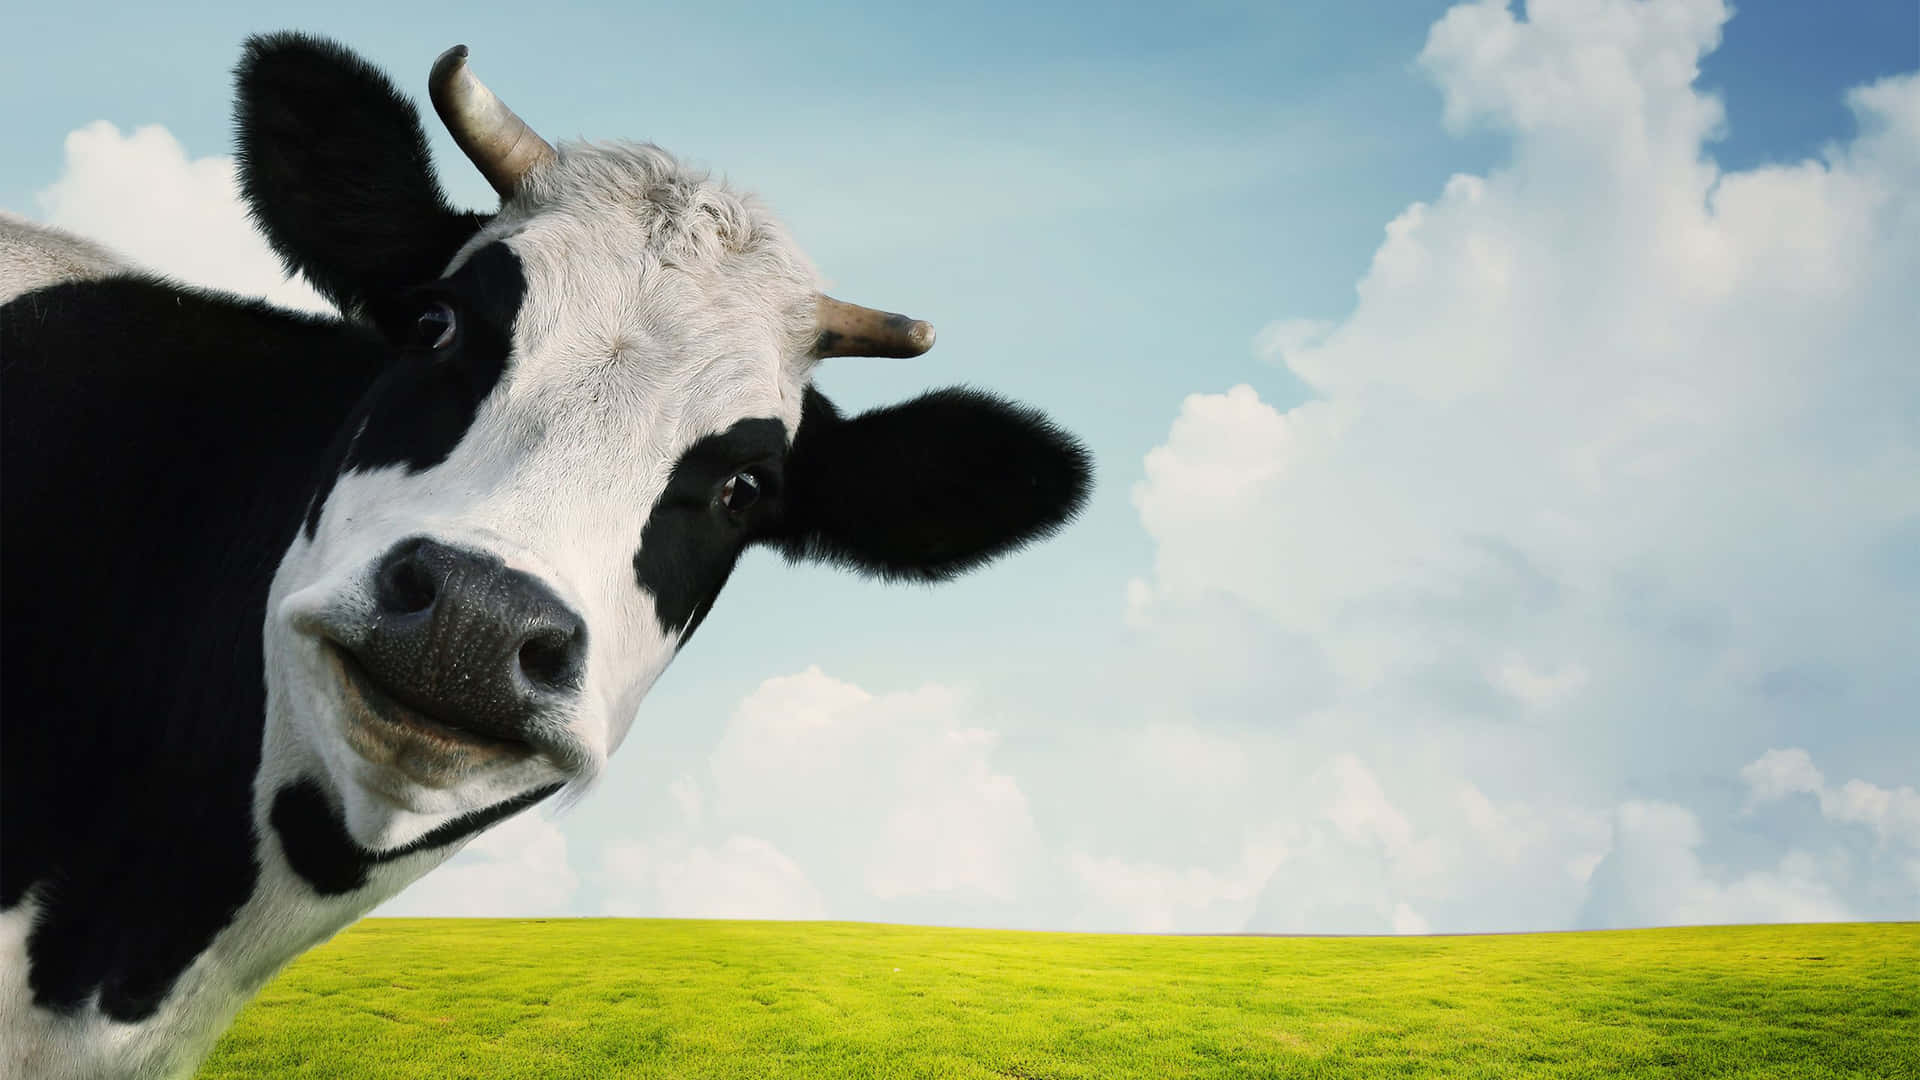 A Cow Is Standing In A Field With A Blue Sky